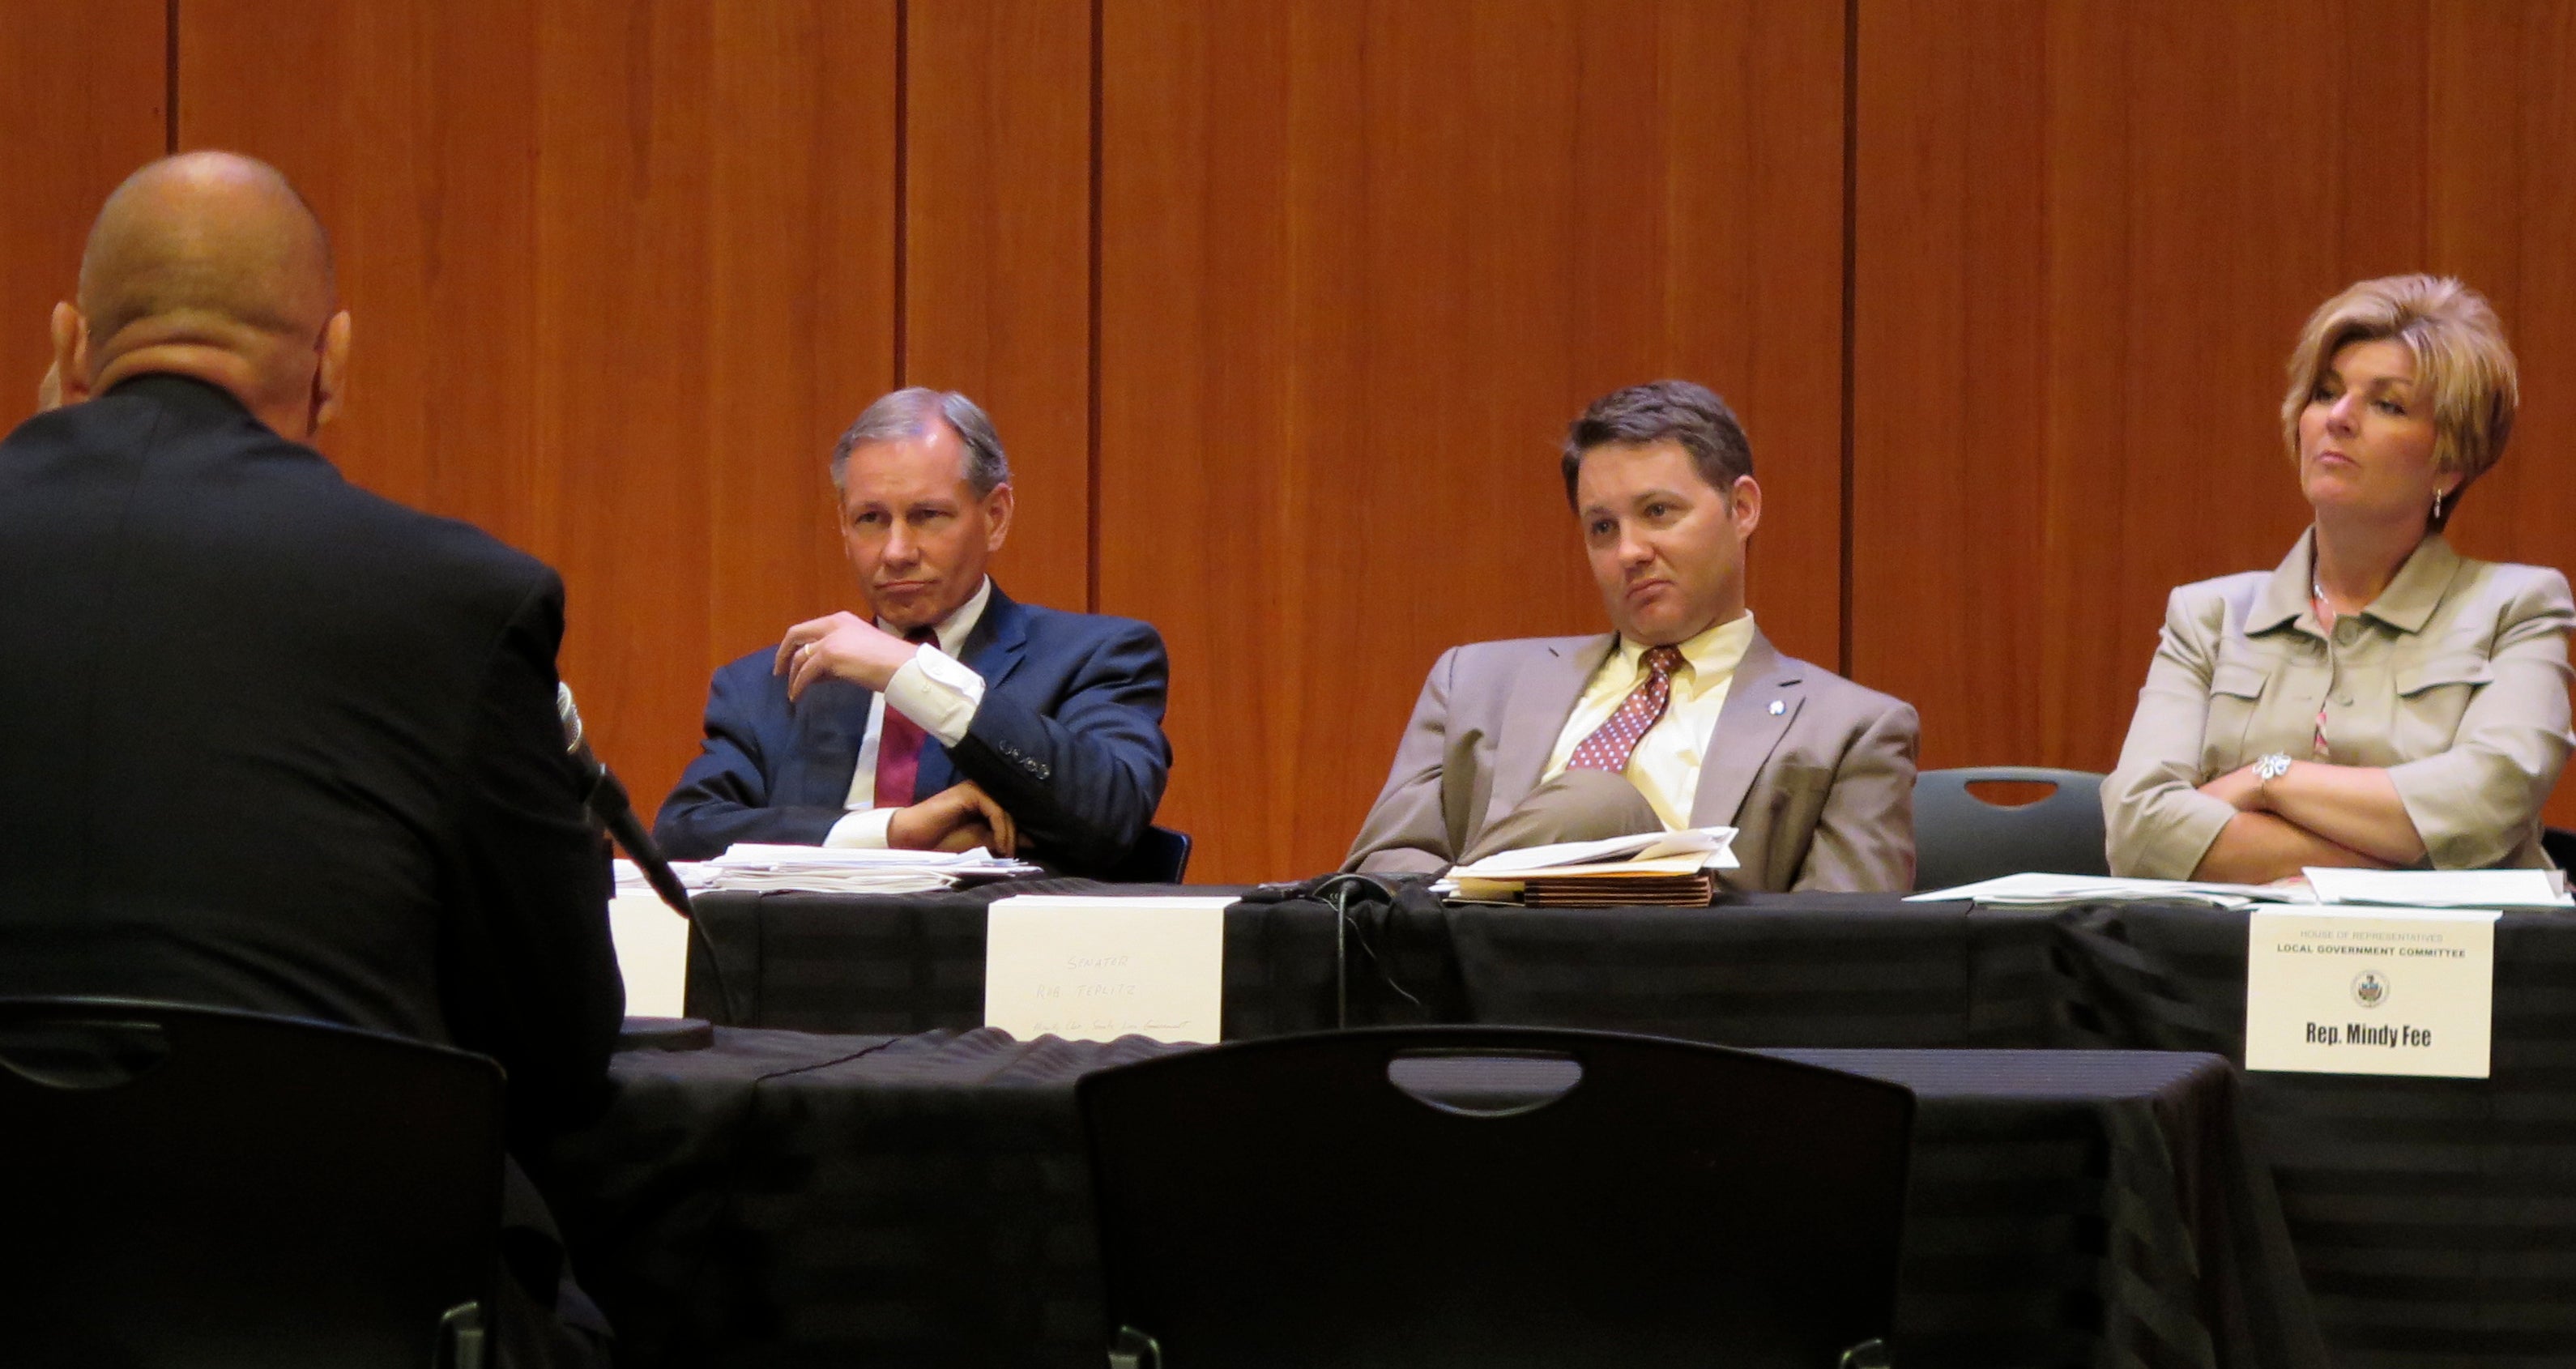  State Sen. John Eichelberger, R-Blair; Sen. Rob Teplitz, D-Dauphin; and Rep. Mindy Fee, R-Manheim; listen to testimony during a joint Local Government Committees hearing. (Emily Previti/WHYY) 